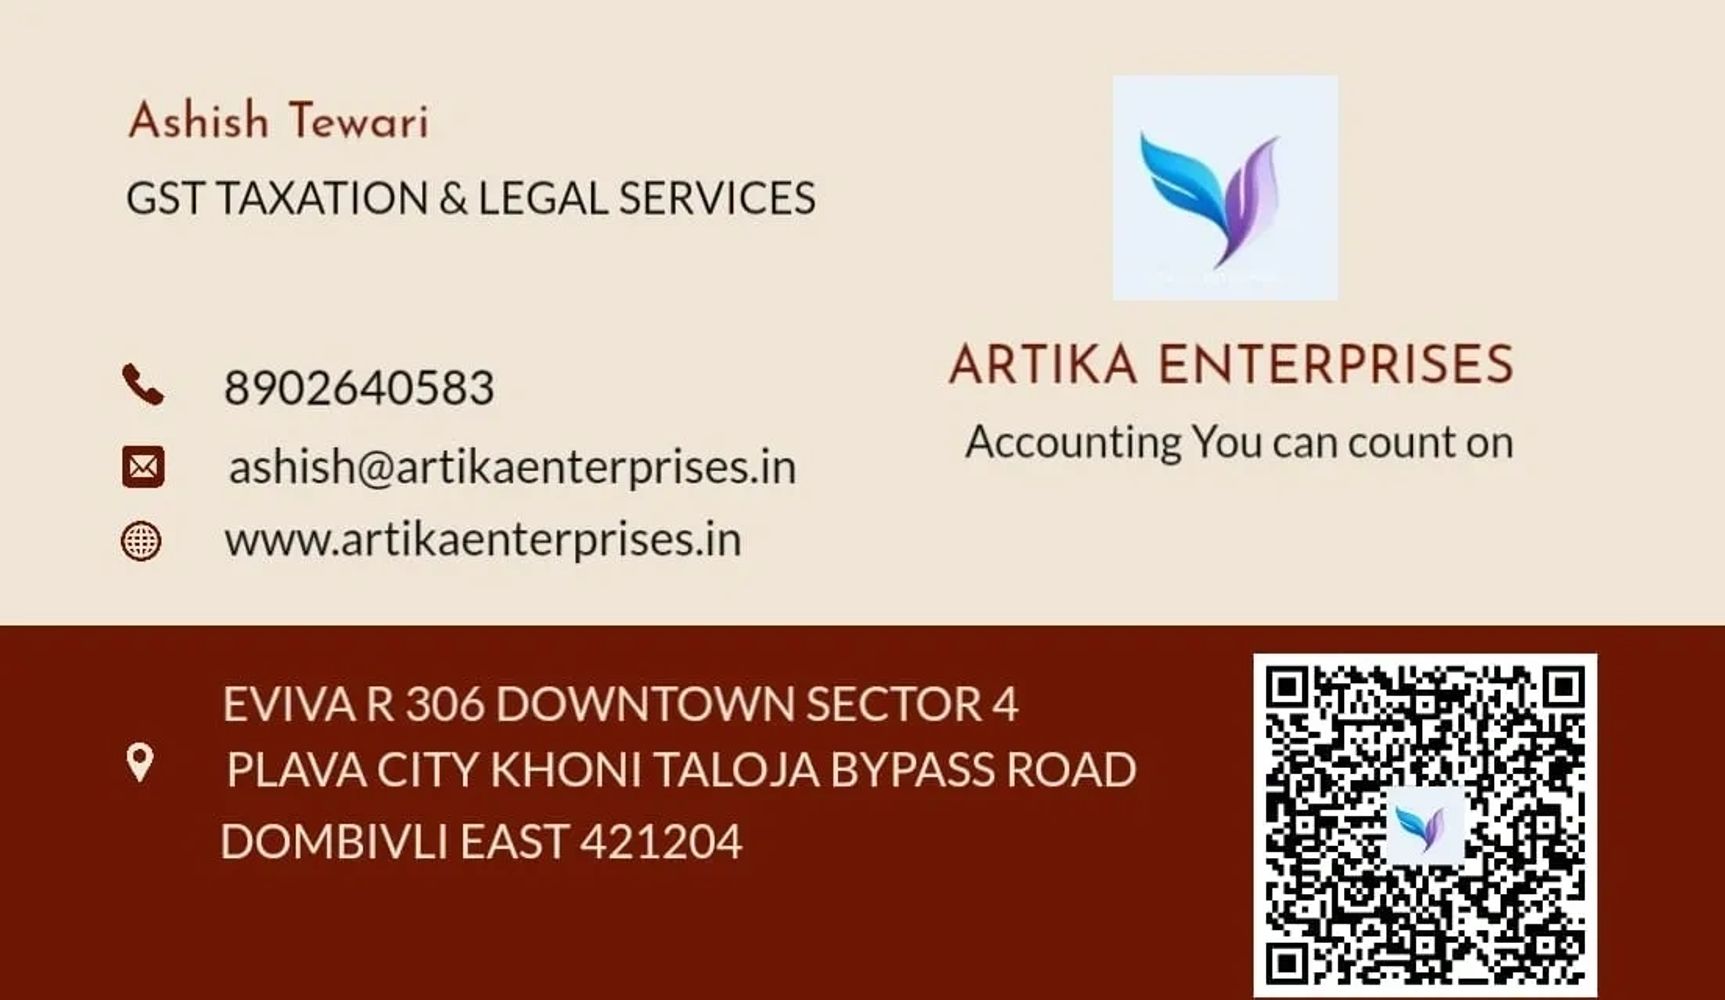 ARTIKA ENTERPRISES IS ONE OFTHE BEST SOLUTION OF YOUR BUSINESS NEEDS ALL  REQUIREMENT FULFILL IN ONE